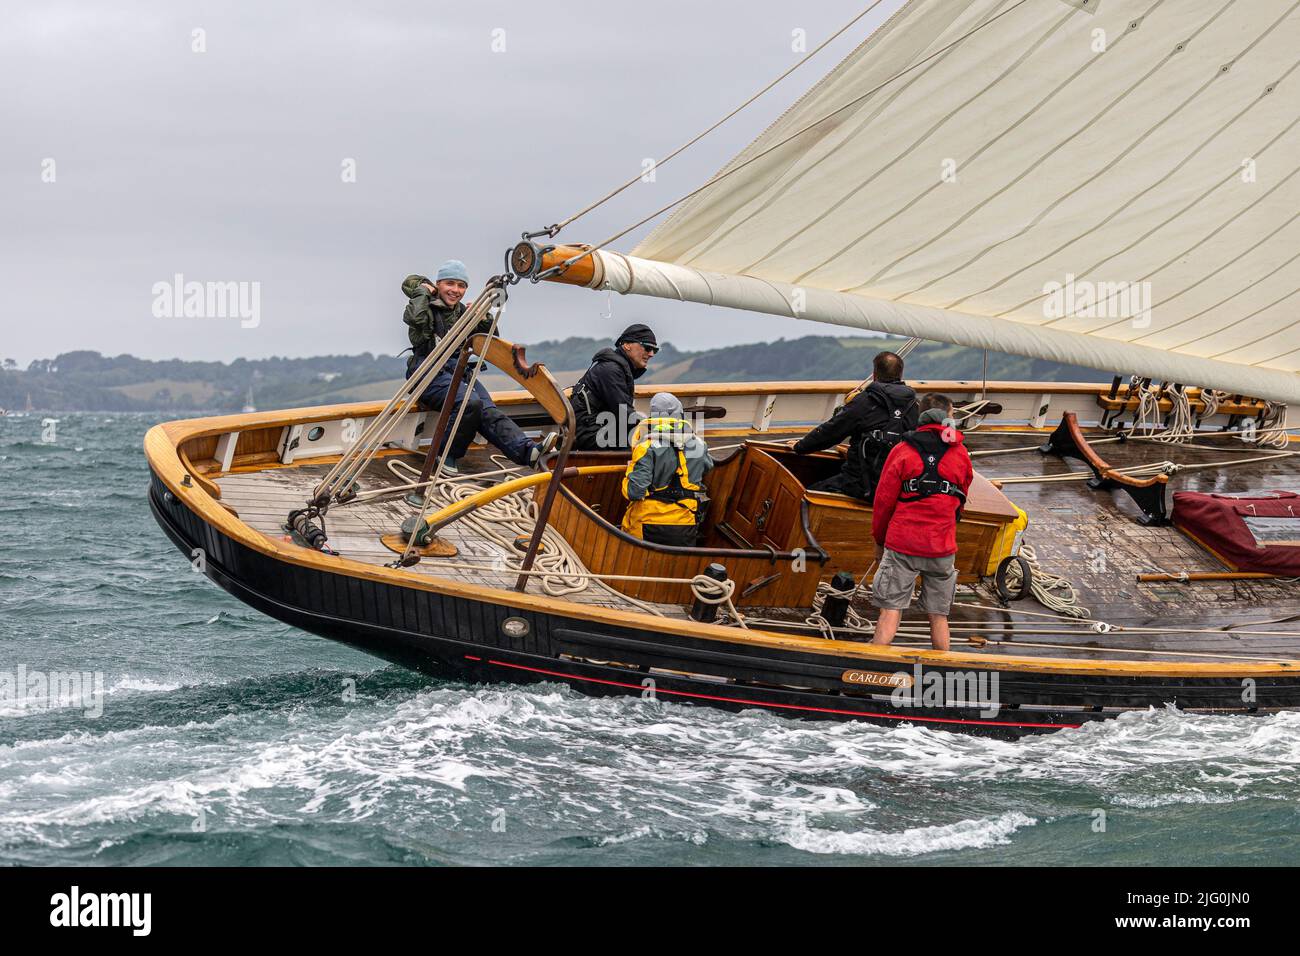 Large Classic wooden vessels, including Bristol Pilot Cutters, race in Carrick Roads in 32knots of wind (half gale) during Falmouth Classics Regatta Stock Photo